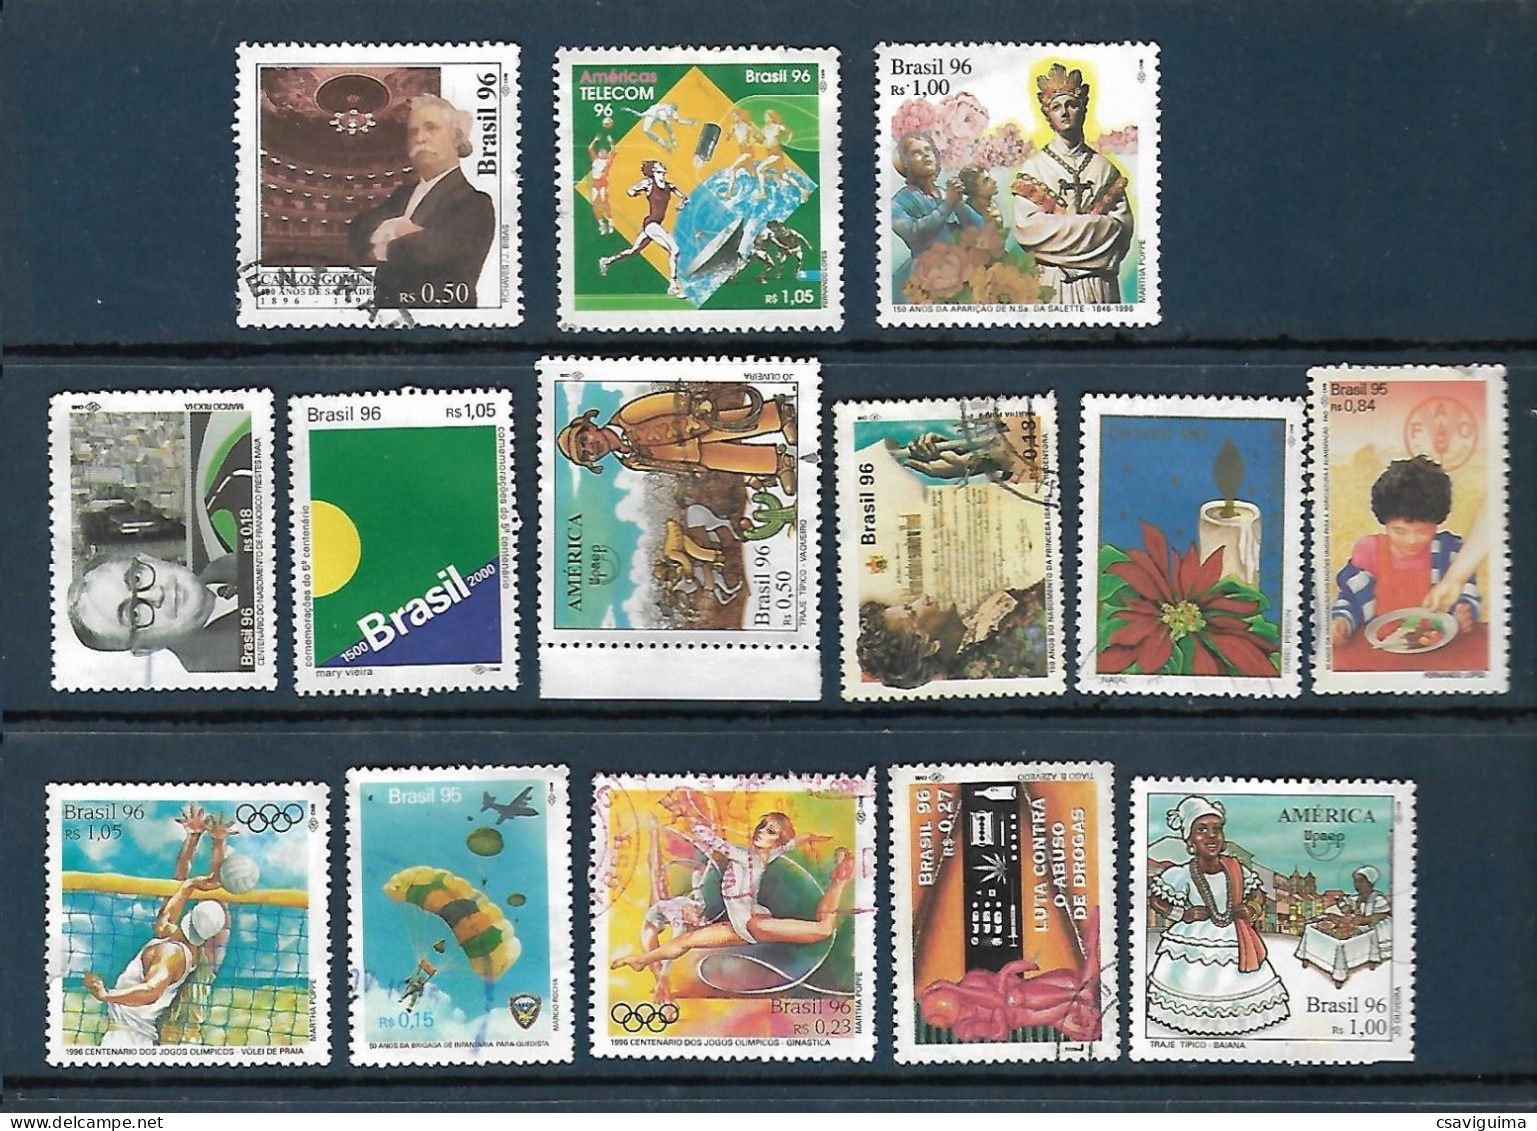 Brasil (Brazil) - 1996 - Set 14 Stamps: Used, Hinged (##4) - Used Stamps